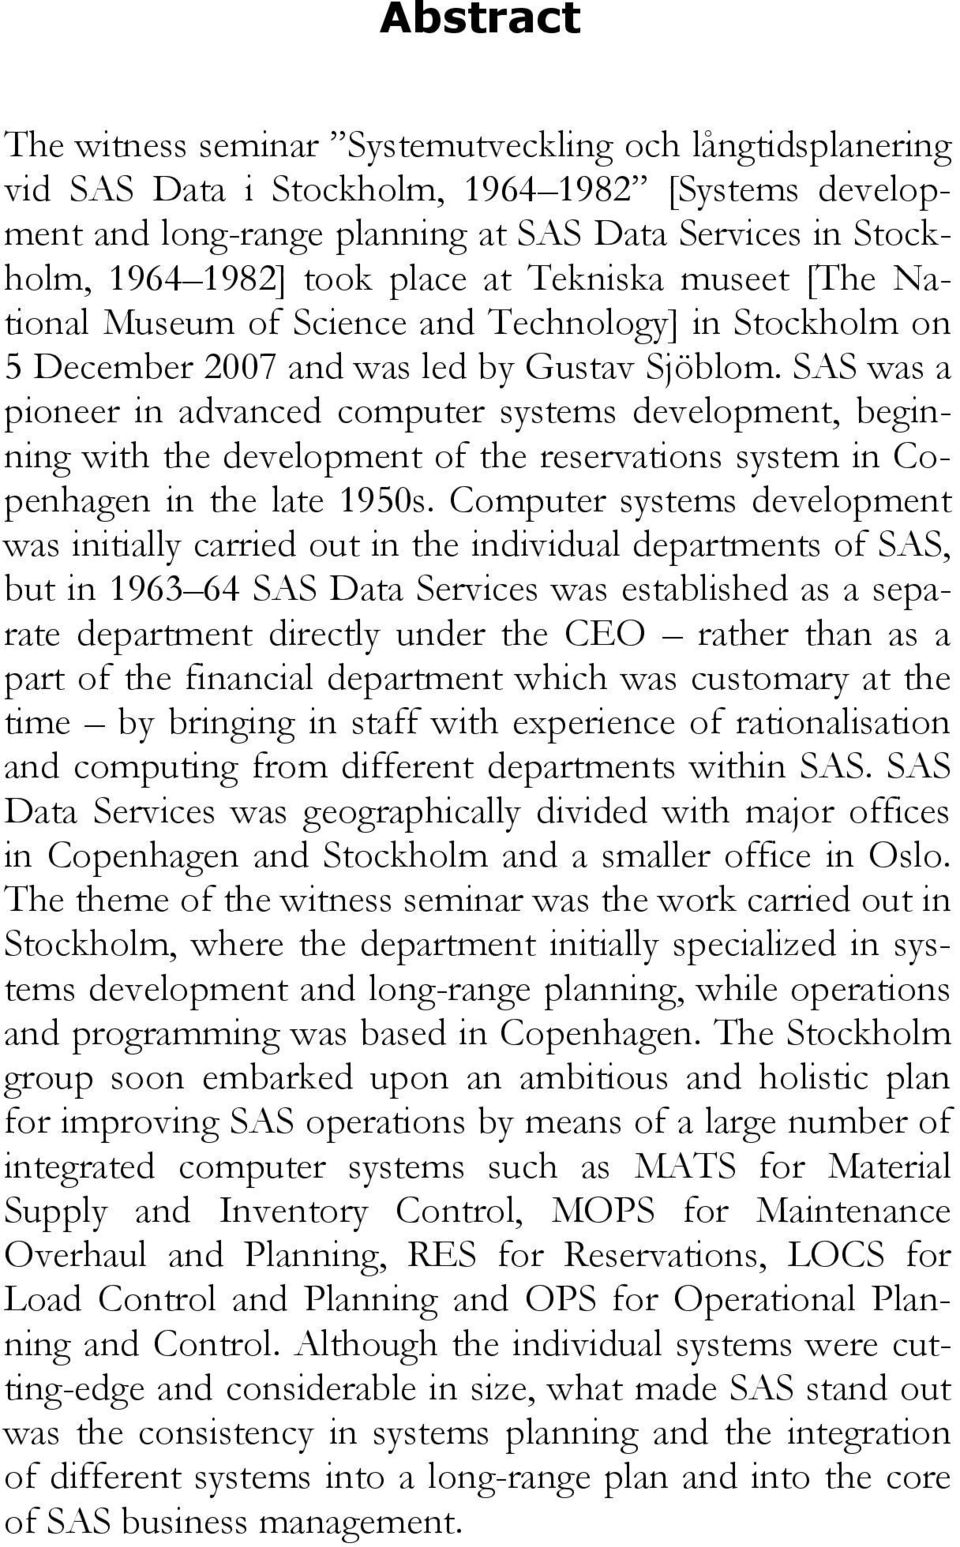 SAS was a pioneer in advanced computer systems development, beginning with the development of the reservations system in Copenhagen in the late 1950s.